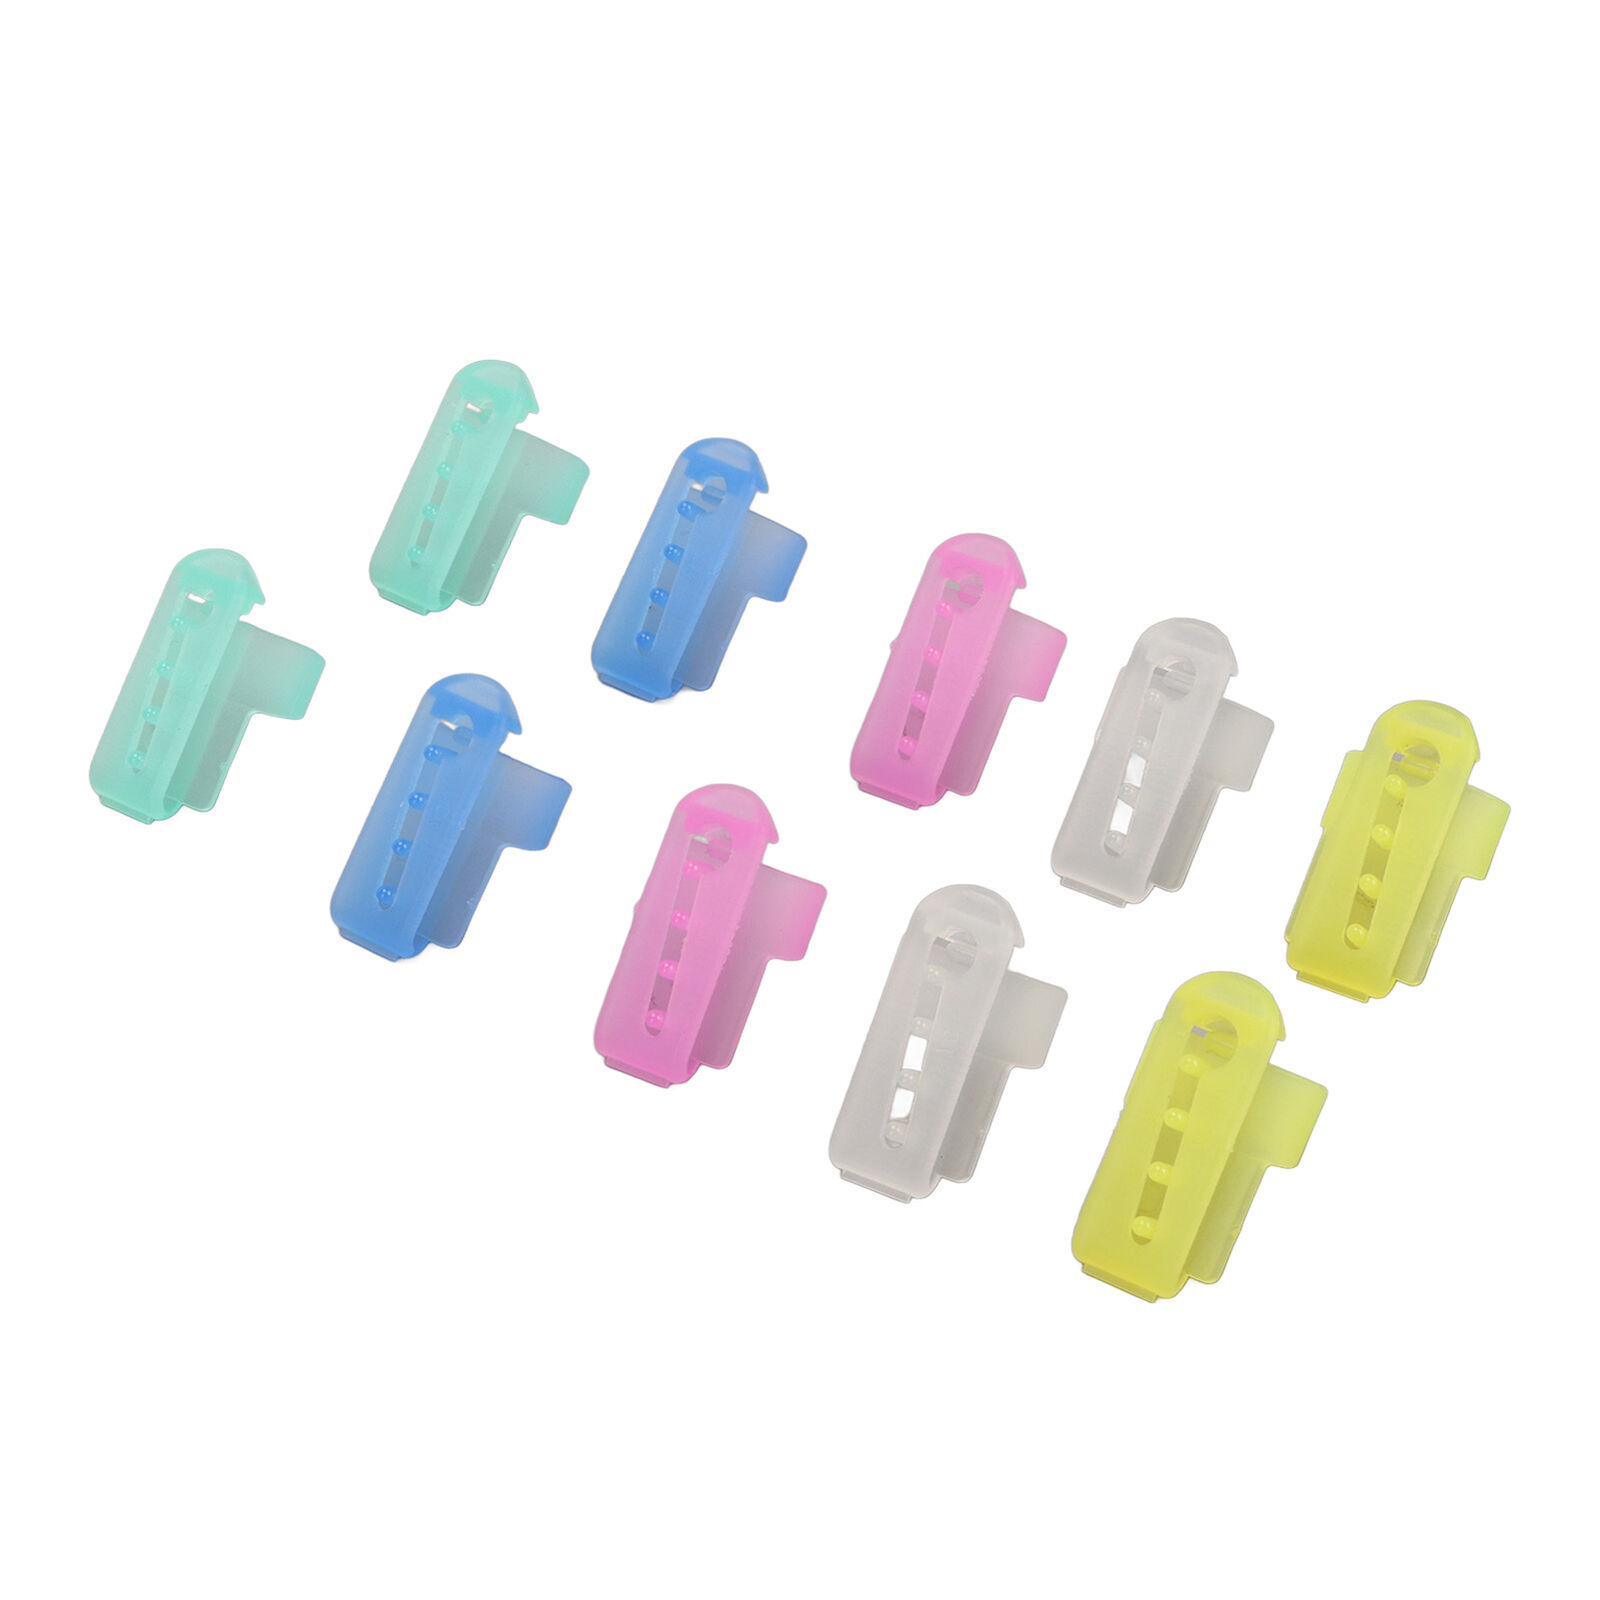 10pcs Knitting Thimble Portable Glossy Appearance Yarn Finger Holder Spares DGD